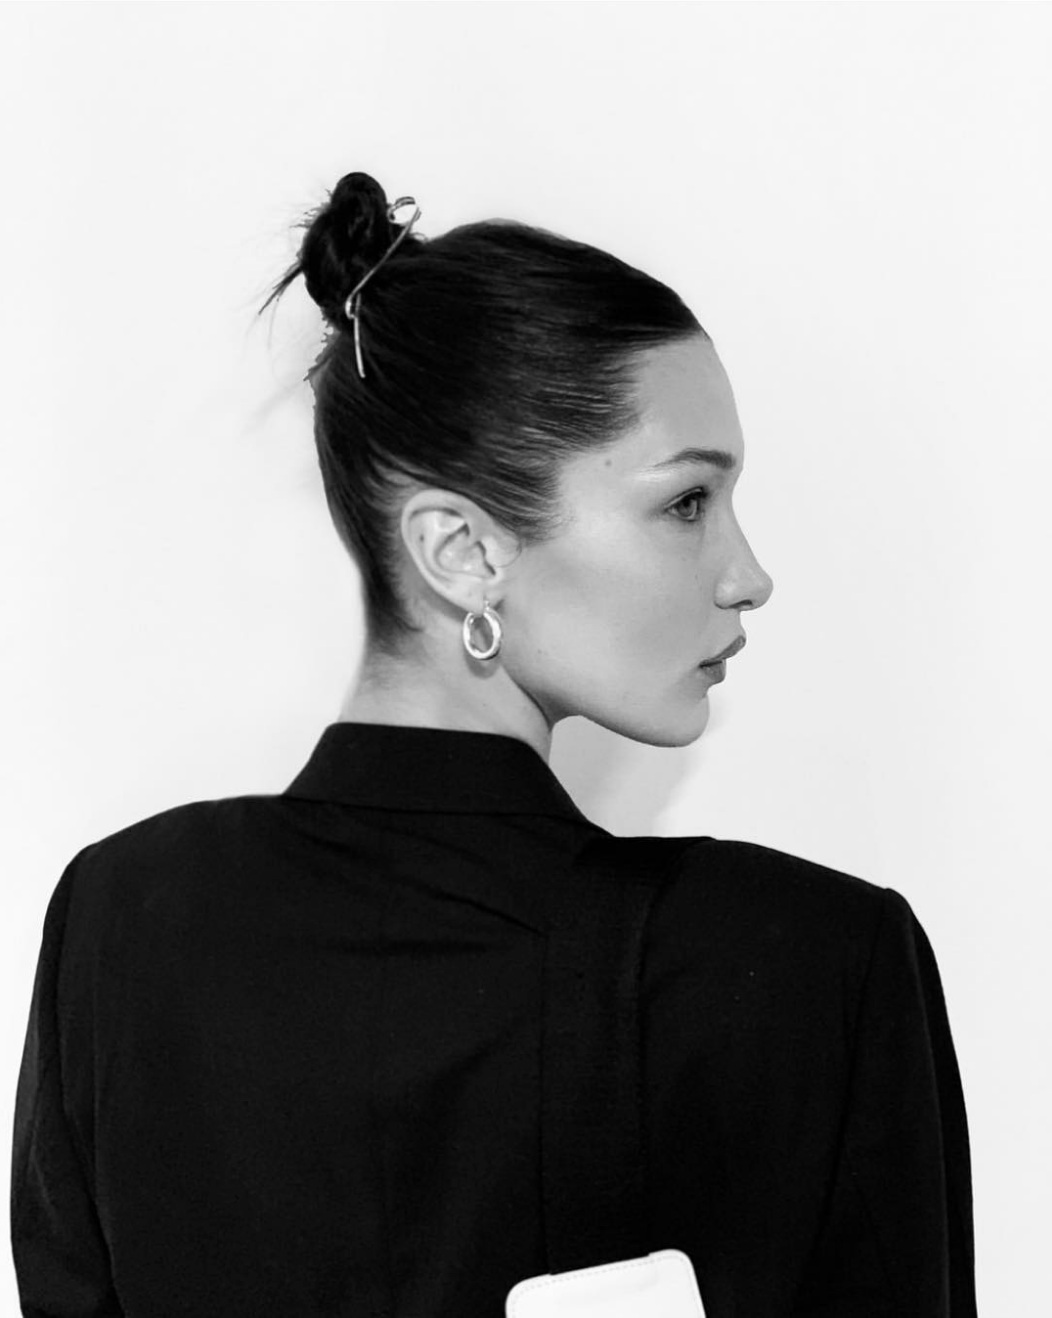 This is the product Bella Hadid uses to make her iconic hairstyle -  HIGHXTAR.